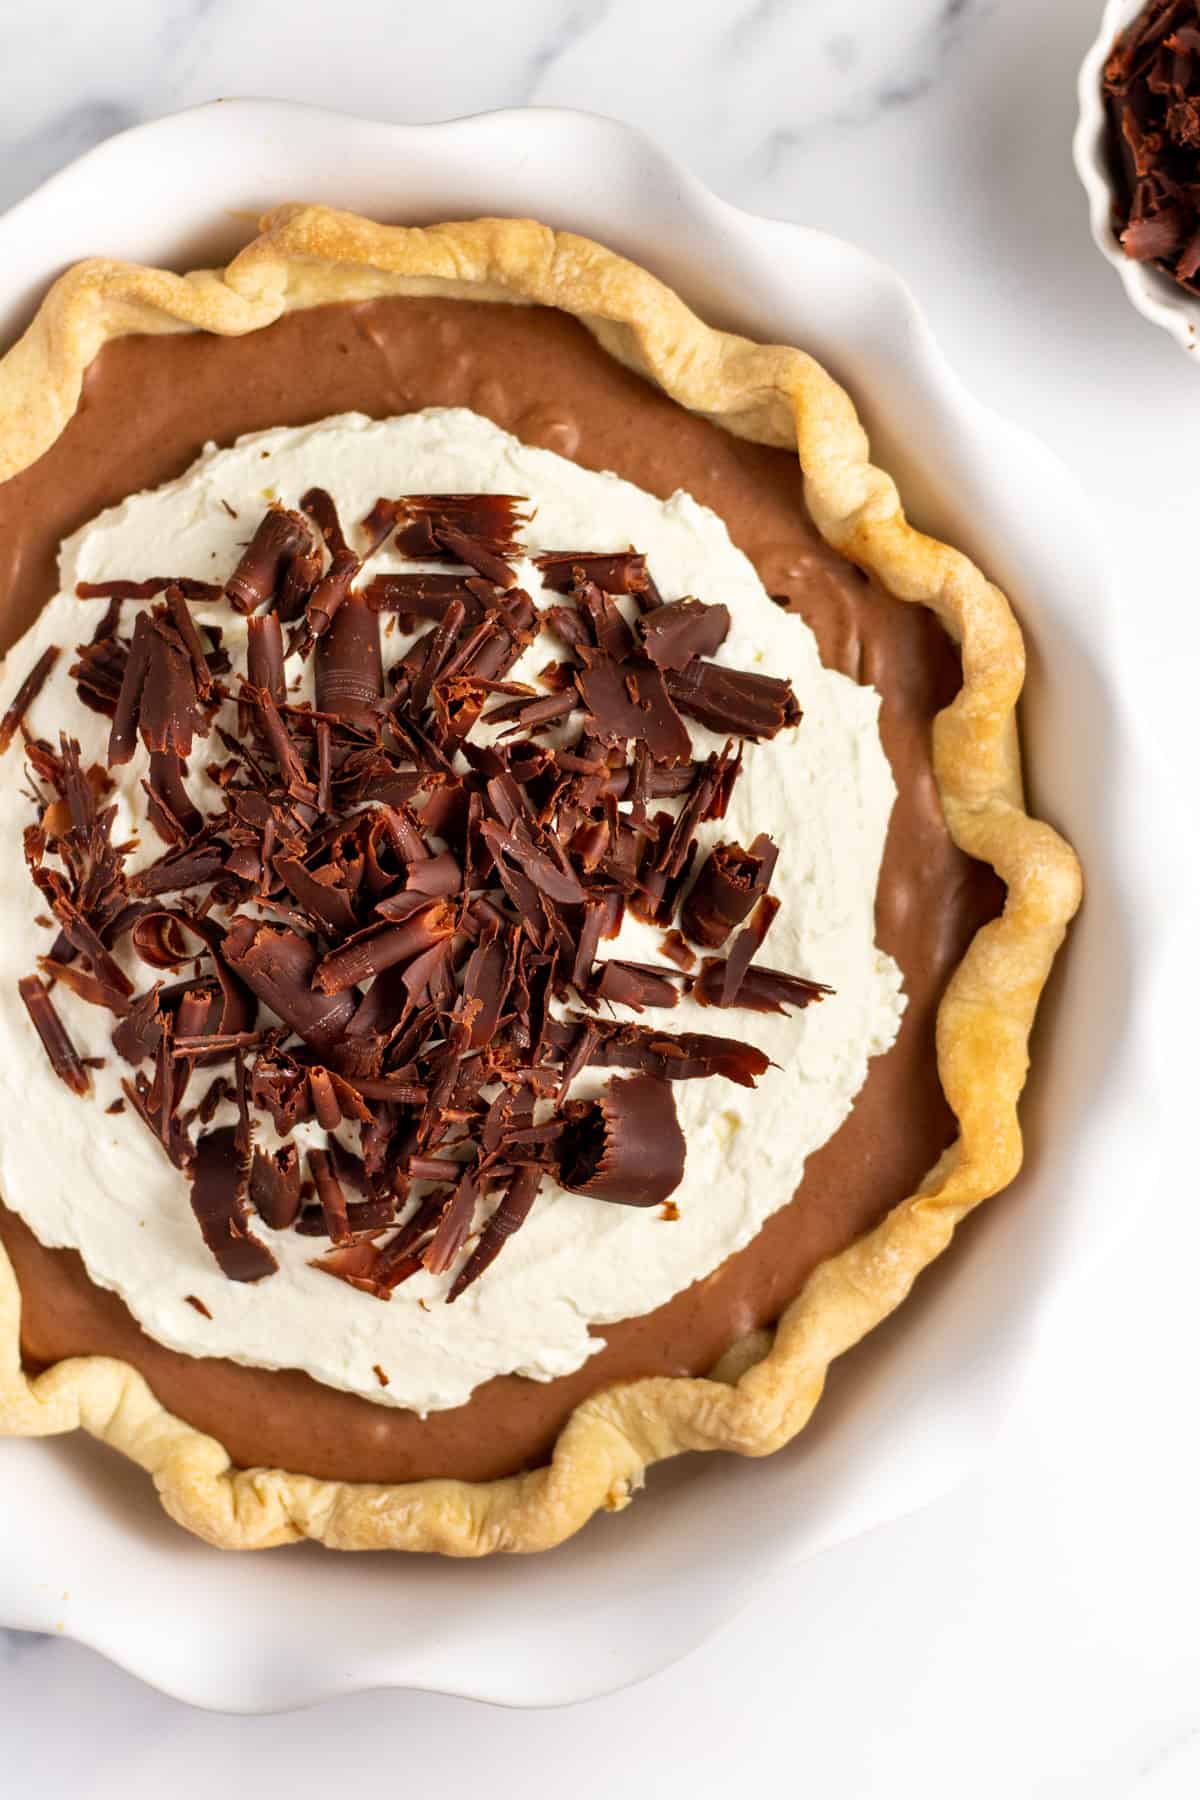 french silk pie with homemade pie crust whipped cream and chocolate shavings served in a pie dish